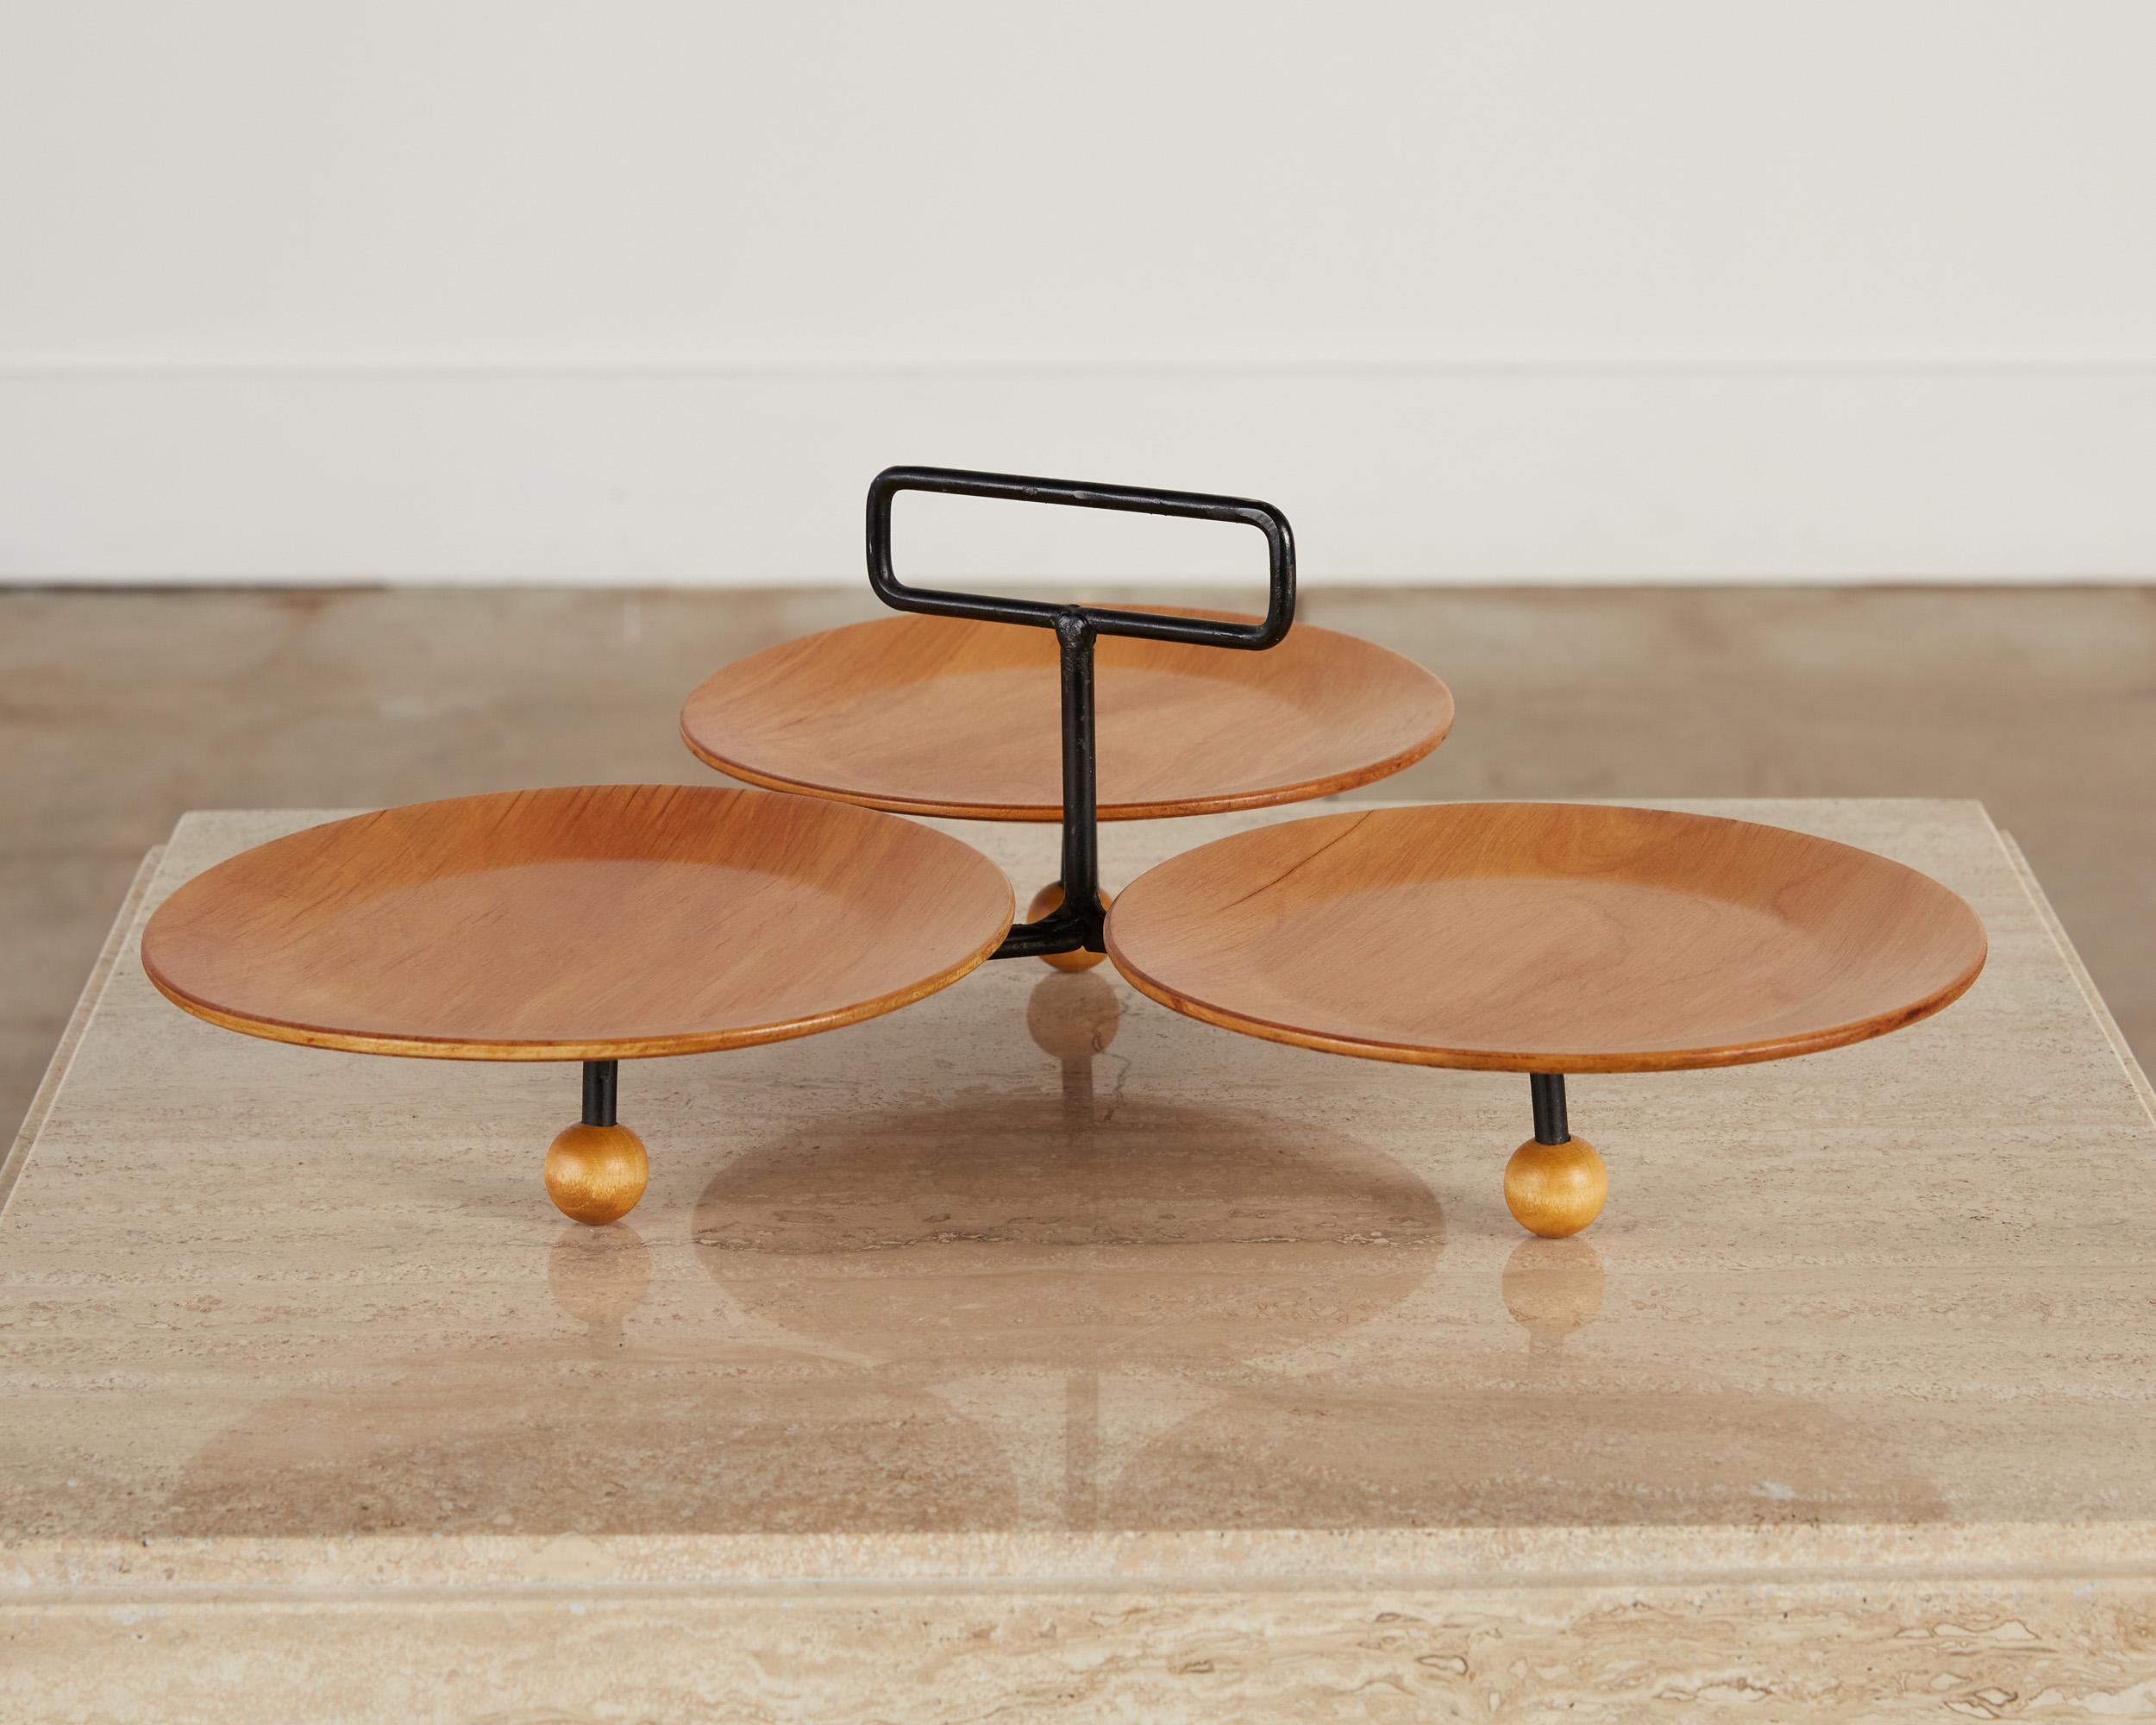 Three plate serving tray by Tony Paul, USA, c.1950s. The tray features a trio of circular concave wood disks that are supported by an iron frame with wooden ball feet. There is a rectangular iron handle that comes up from the frame in the middle of